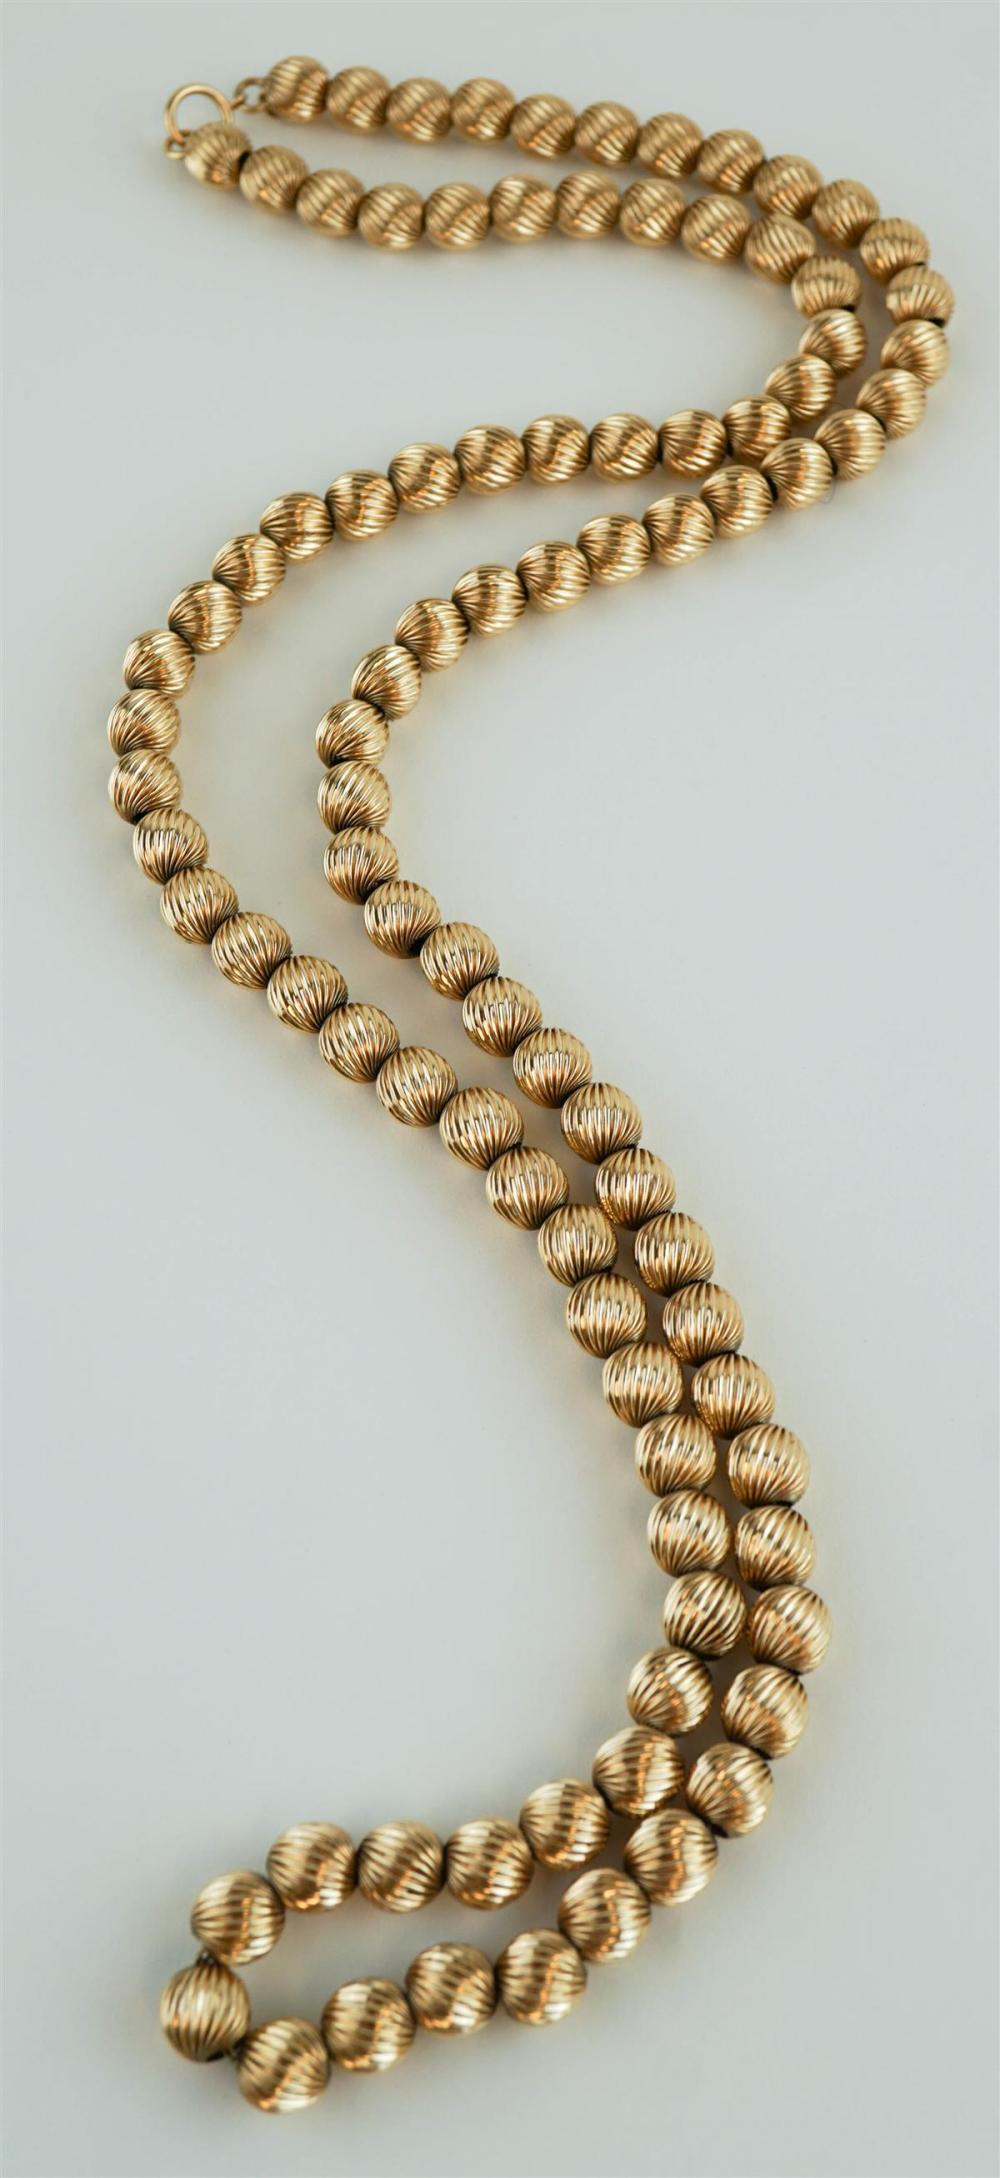 14K YELLOW GOLD FLUTED BEAD NECKLACE14K